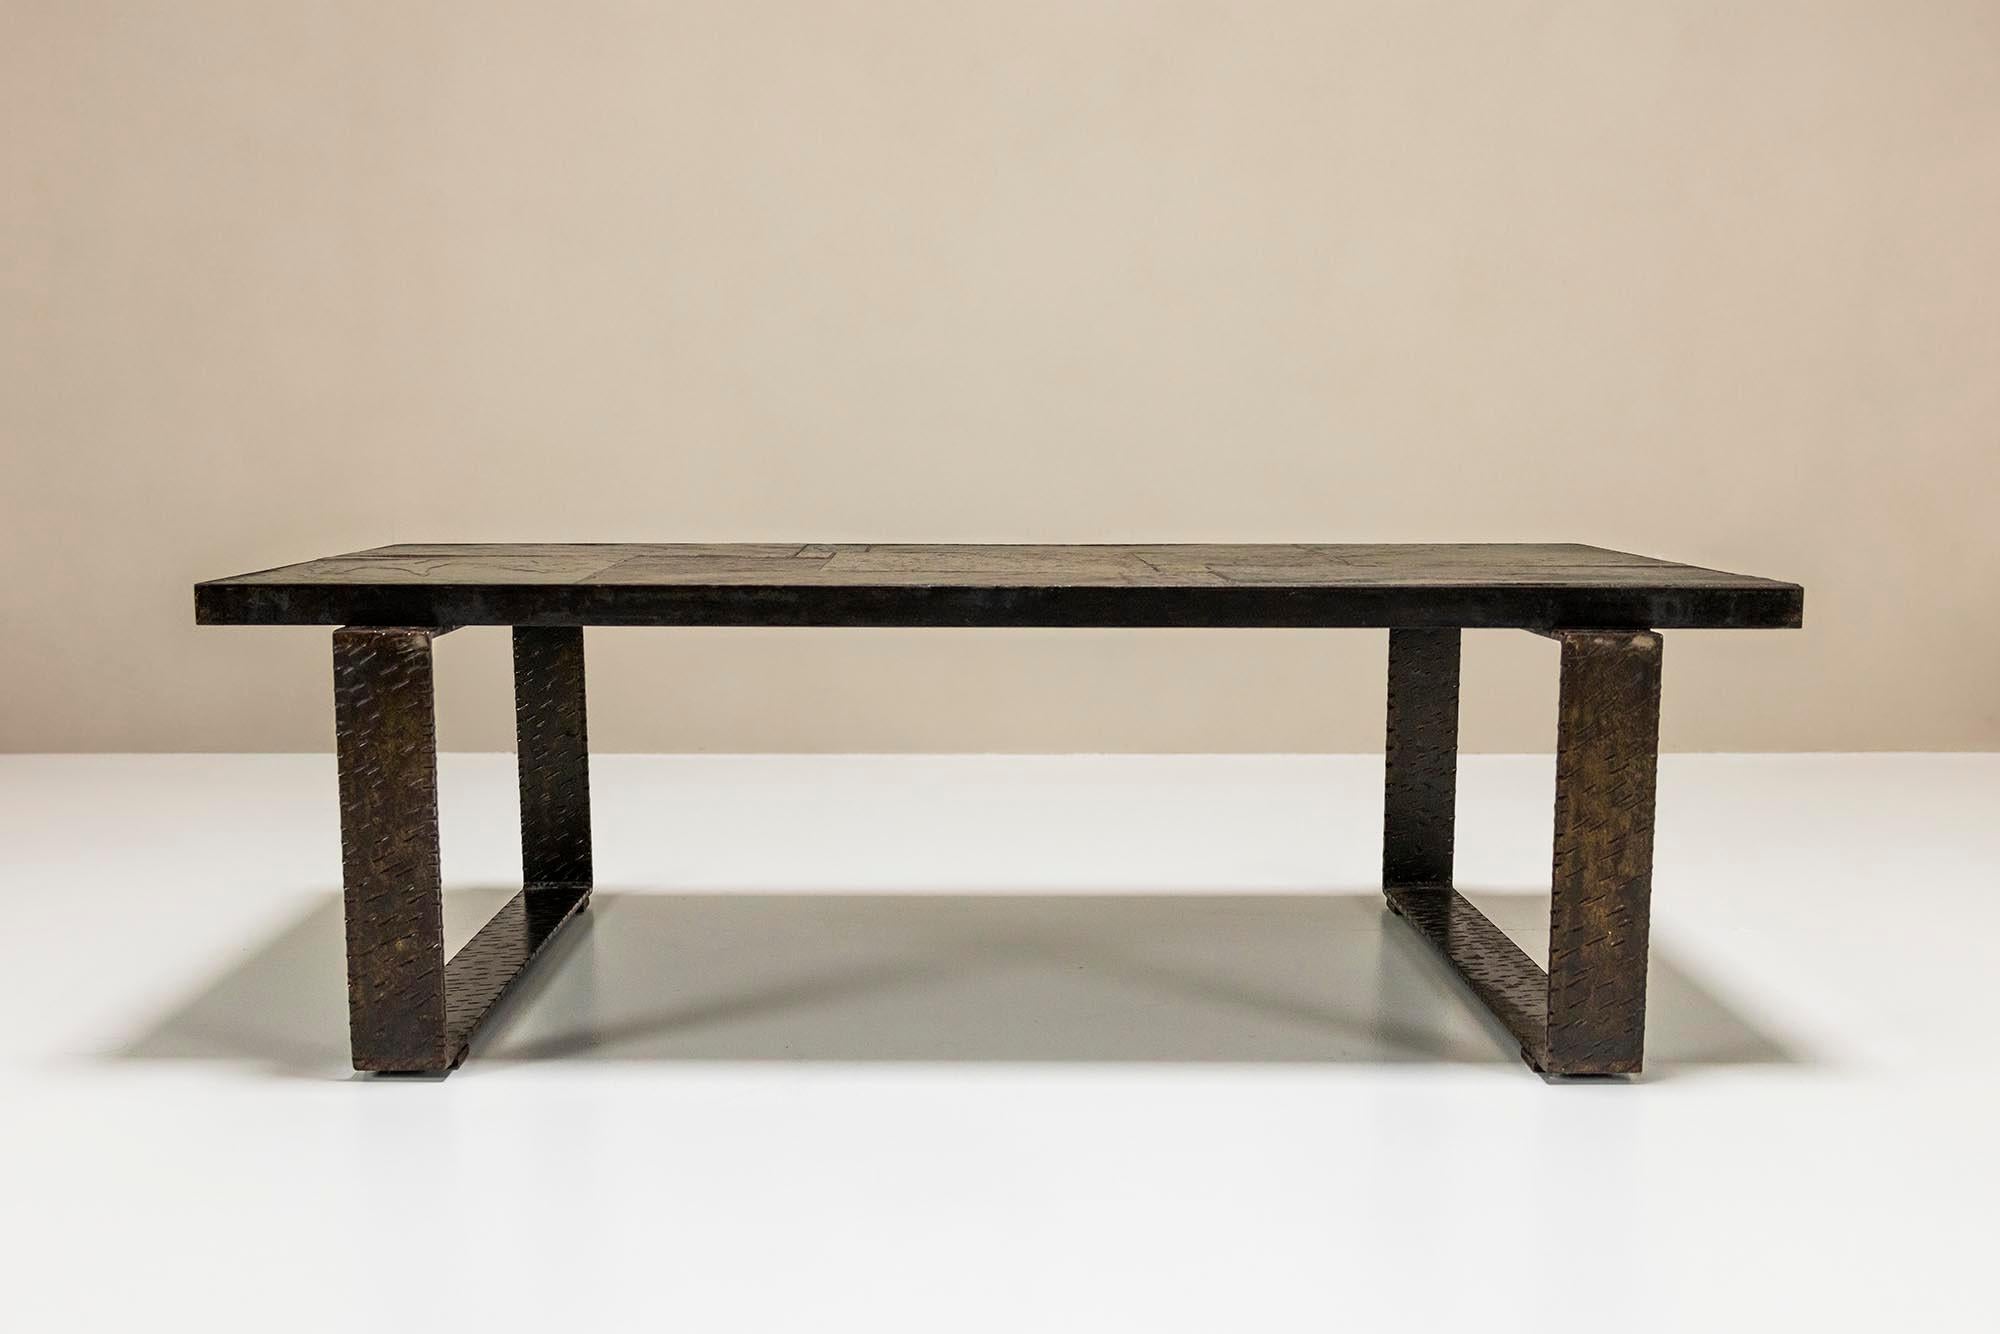 Paul Kingma Brutalist Coffee Table In Stone And Hammered Metal, Netherlands 1960 In Good Condition For Sale In Hellouw, NL